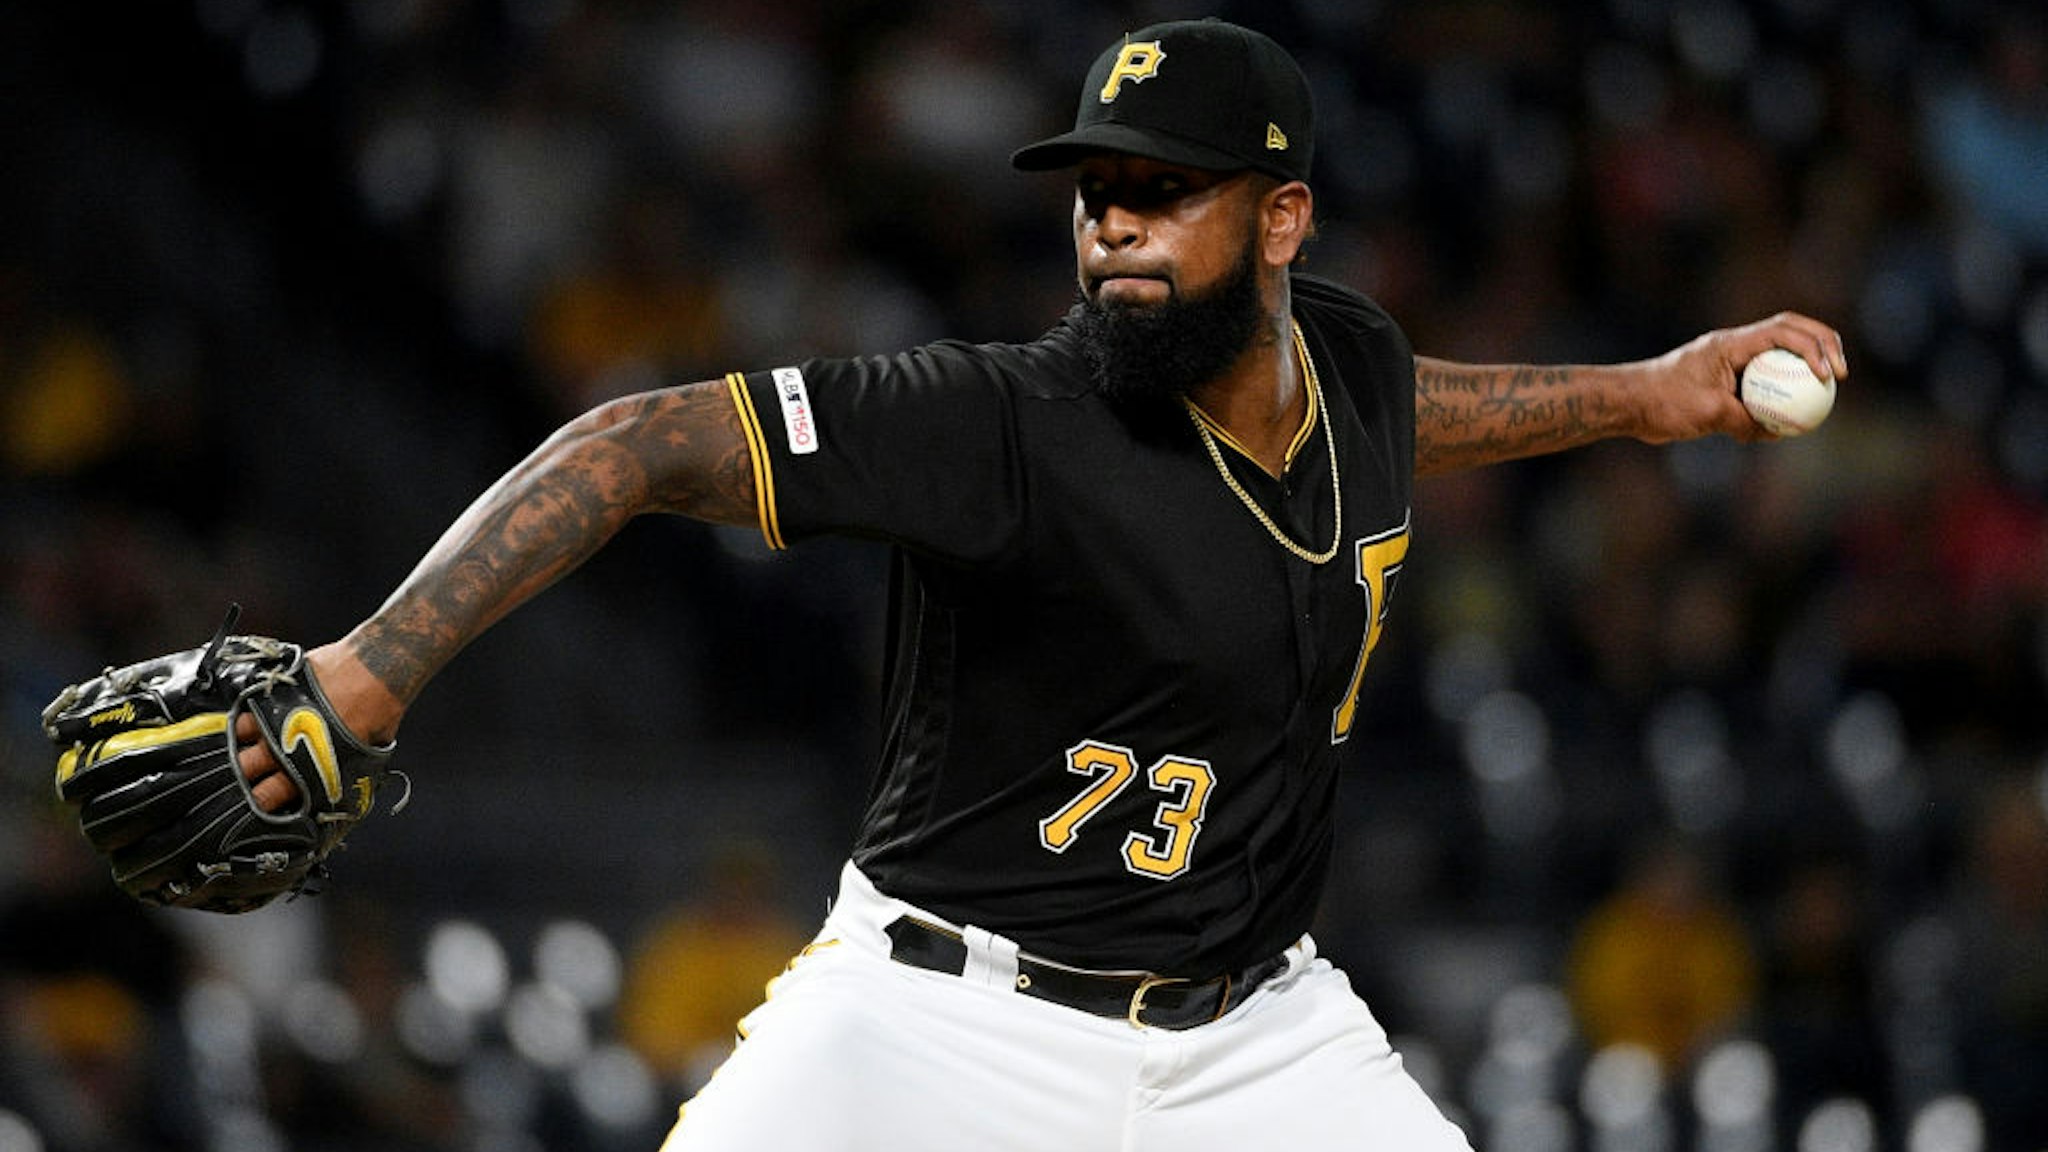 PITTSBURGH, PA - SEPTEMBER 06: Felipe Vazquez #73 of the Pittsburgh Pirates delivers a pitch in the ninth inning during the game against the St. Louis Cardinals at PNC Park on September 6, 2019 in Pittsburgh, Pennsylvania. (Photo by Justin Berl/Getty Images)